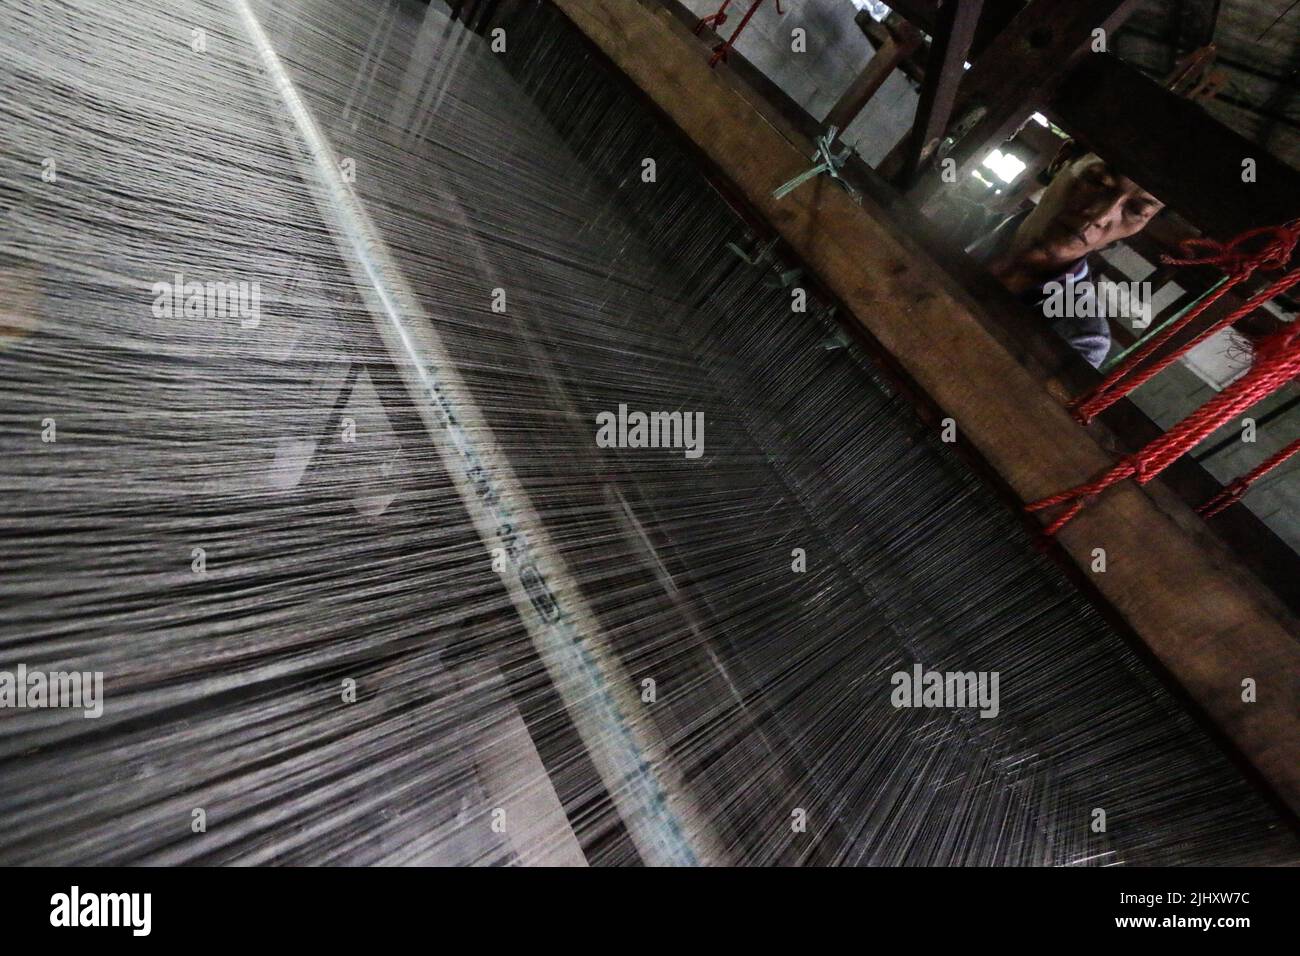 A worker works on a silk production line in Bogor, West Java, Indonesia on July 21, 2022. Stock Photo